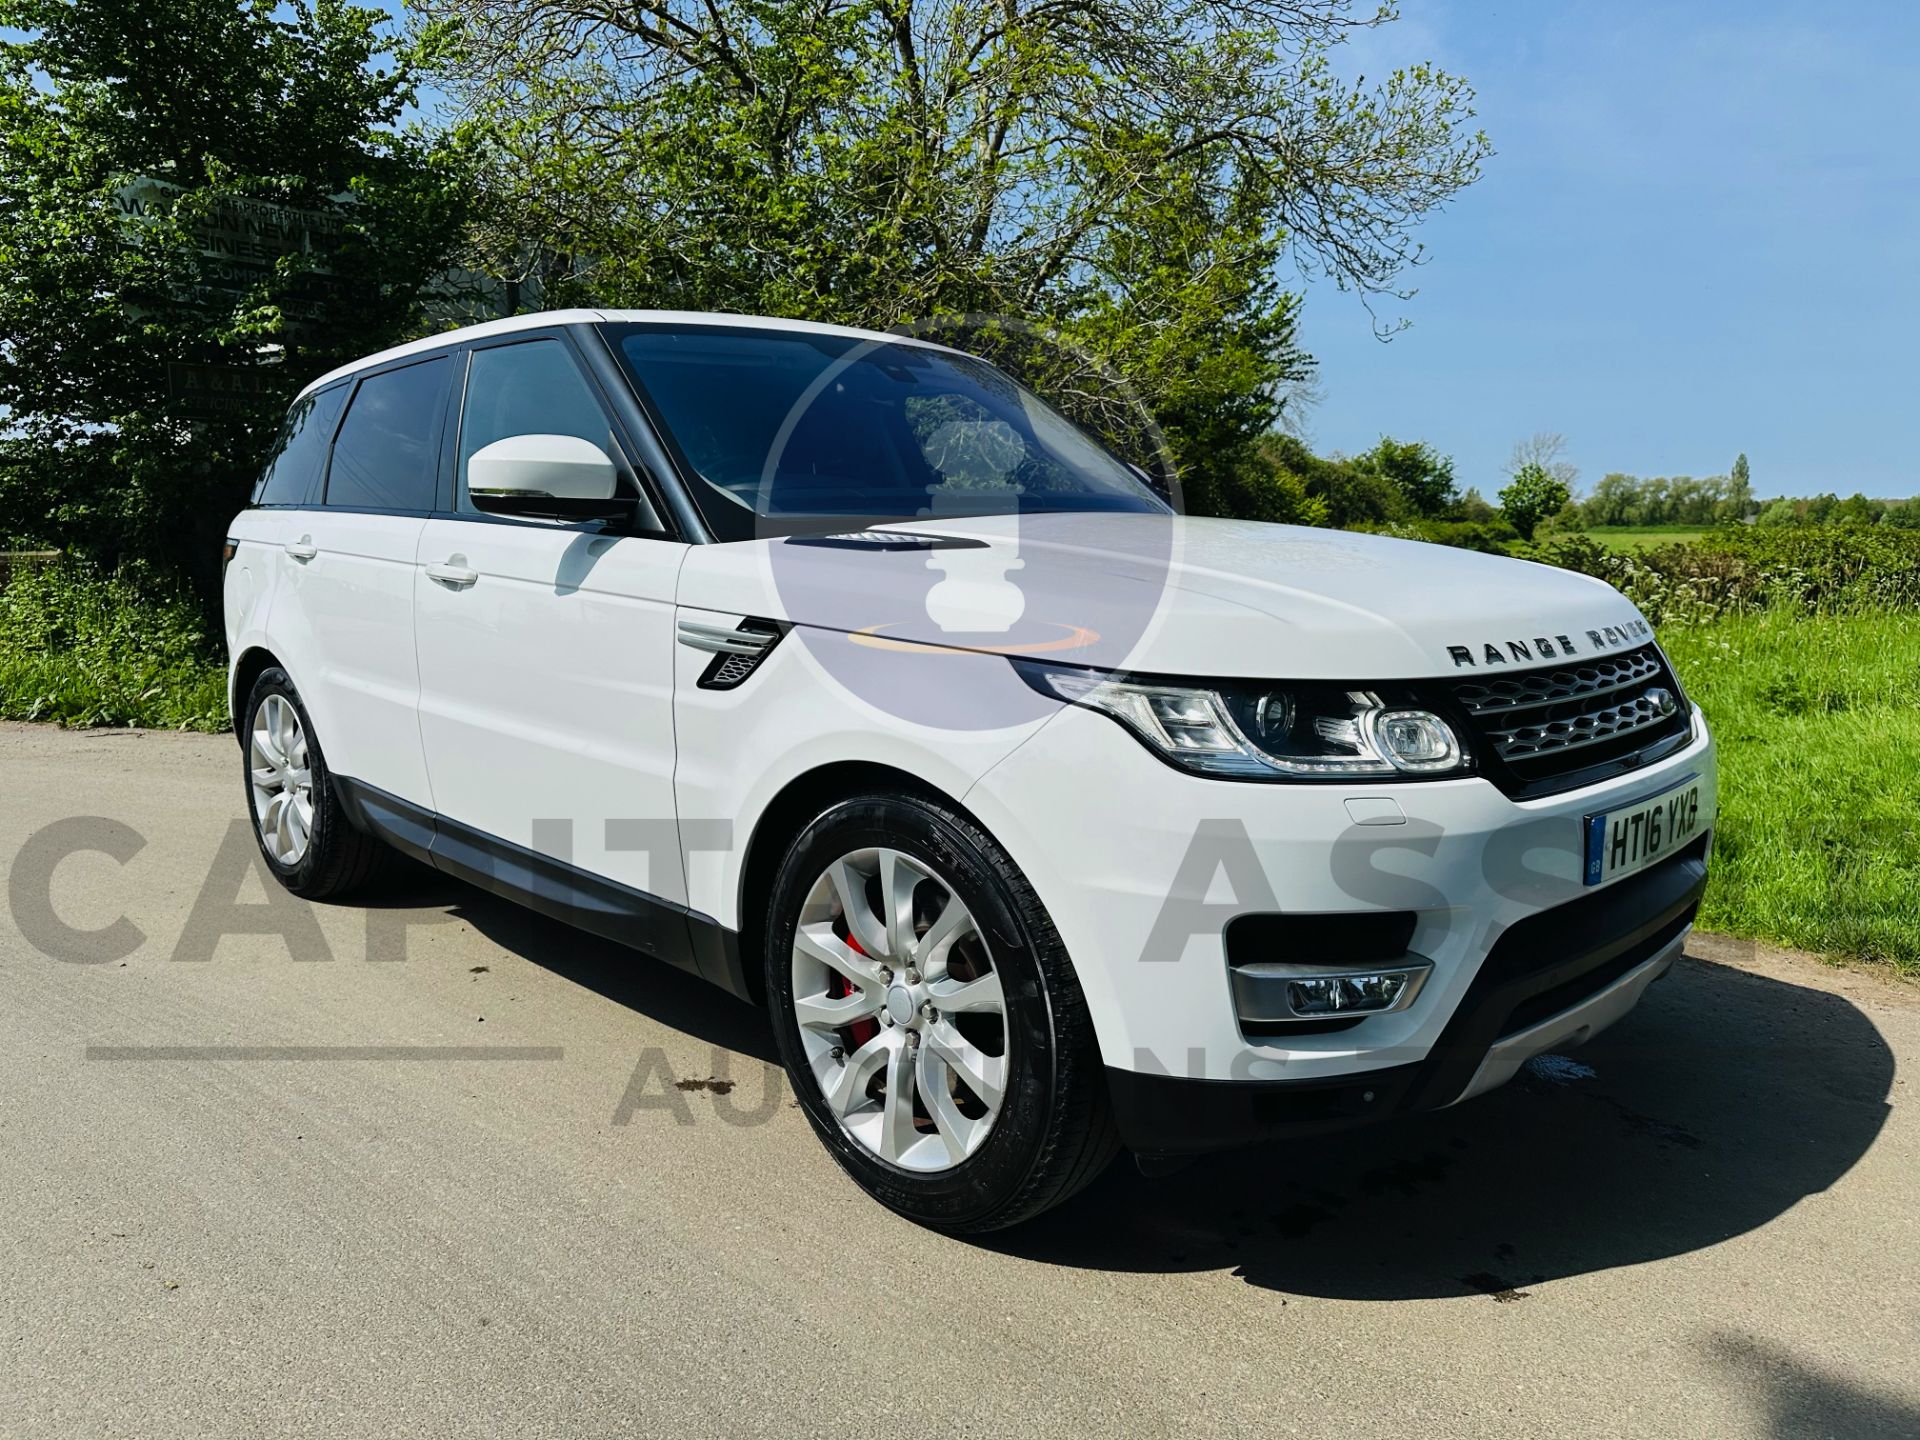 RANGE ROVER SPORT *HSE EDITION* (2016 - FACELIFT MODEL) 3.0 SDV6 - 306 BHP - AUTOMATIC *HUGE SPEC* - Image 2 of 53